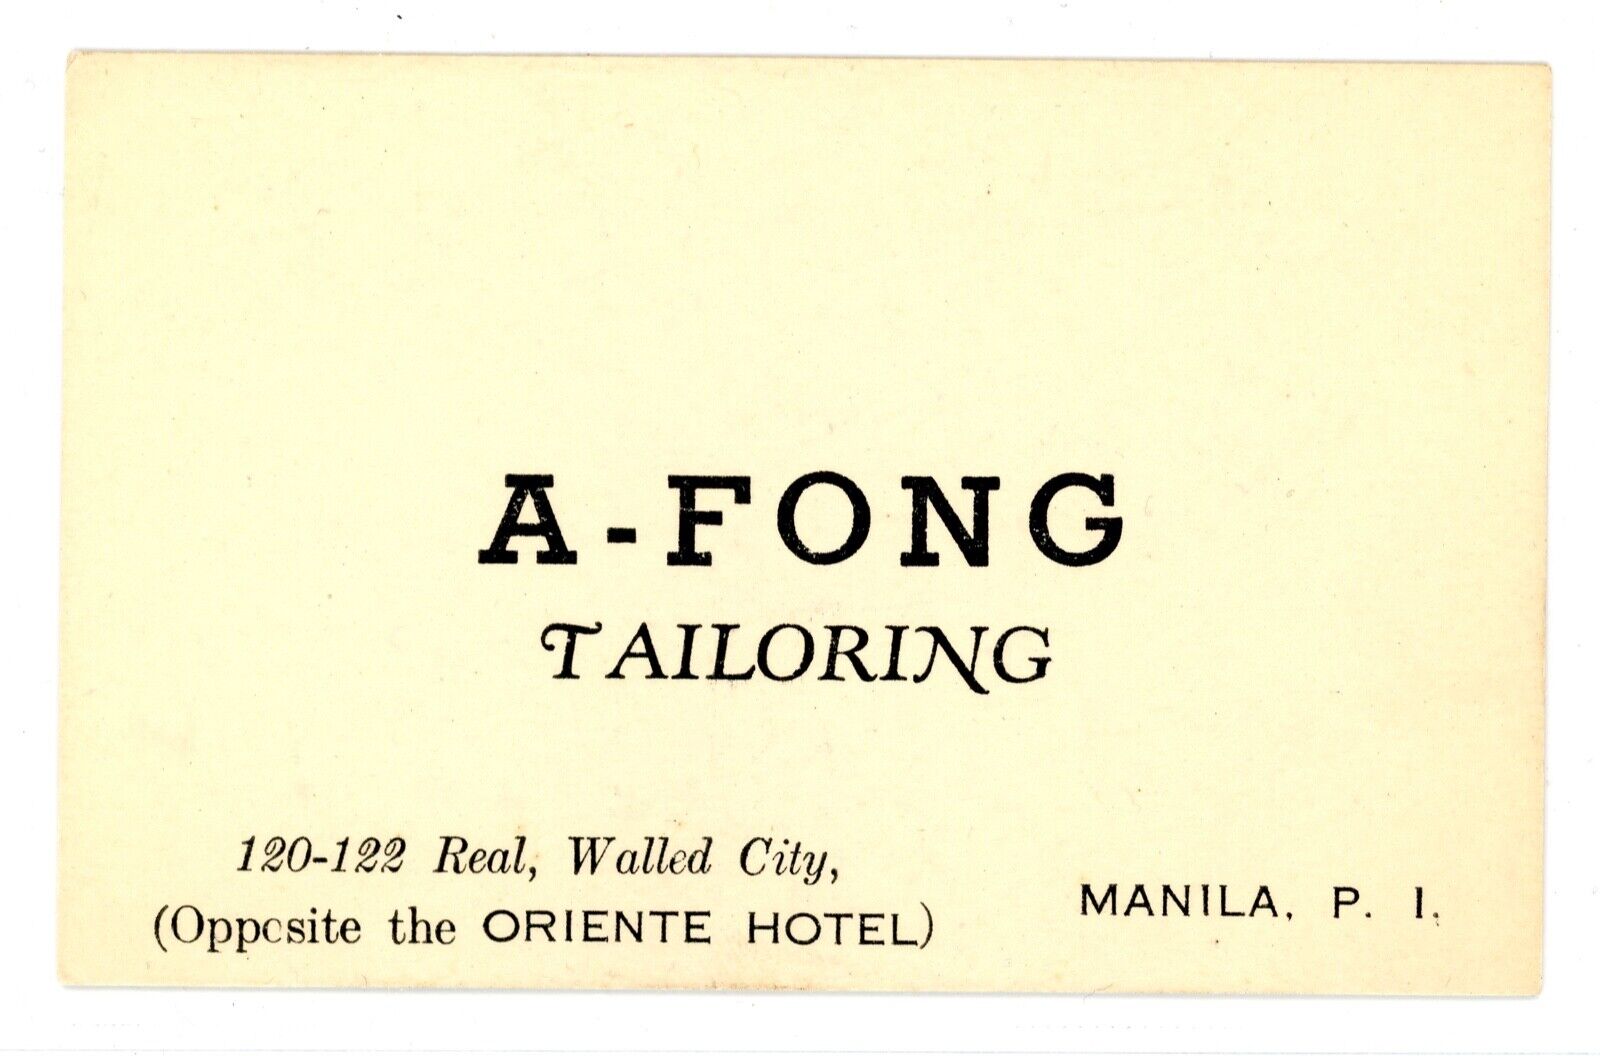 Vintage Philippine Business Card/Advertisement, A. Fong Tailoring